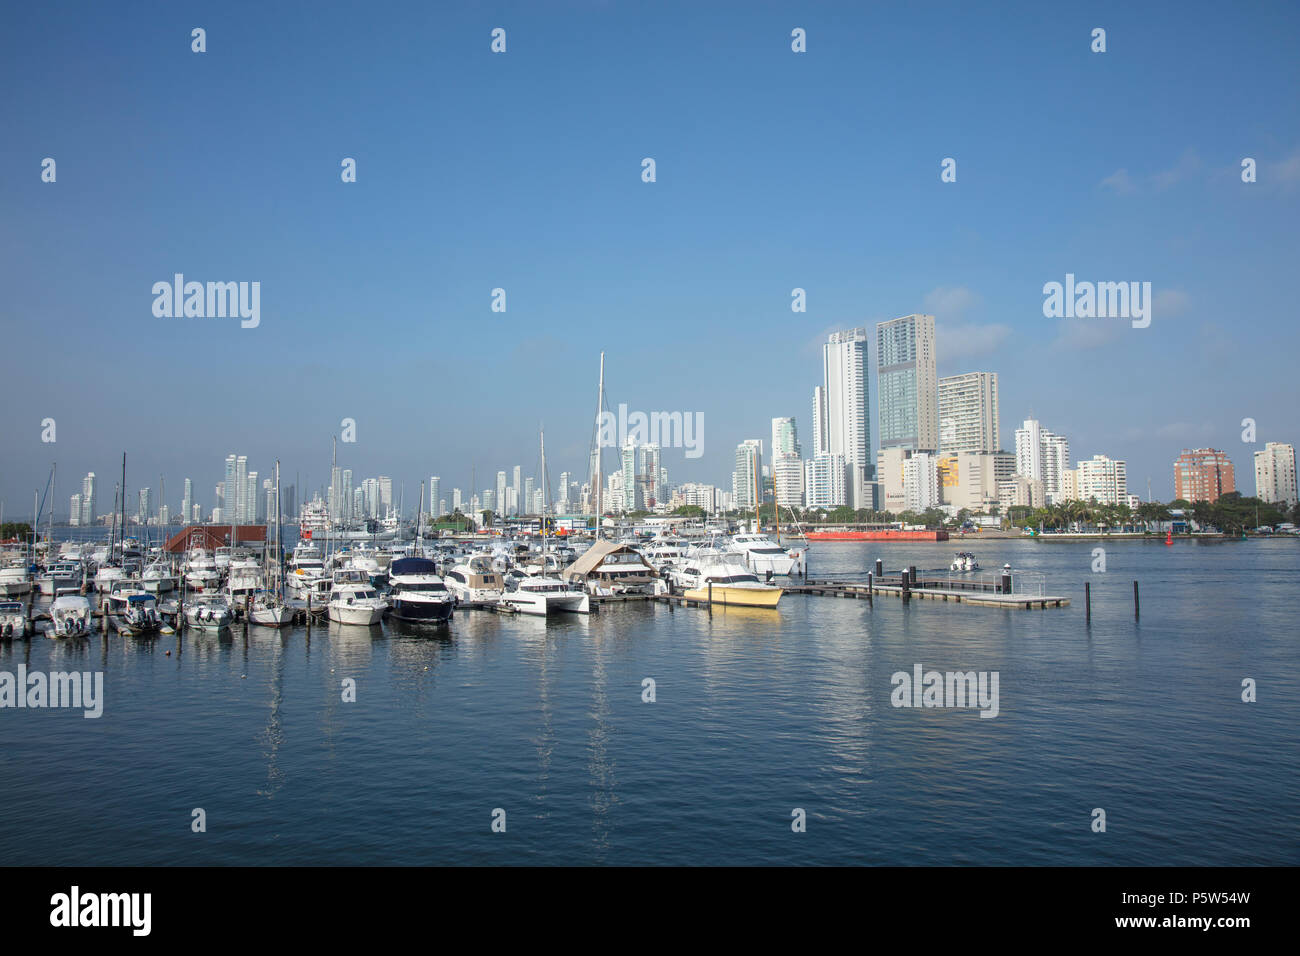 Colombia, Cartagena. Boats and yachts moored in the marina harbour with the skyline of the city centre behind. Stock Photo